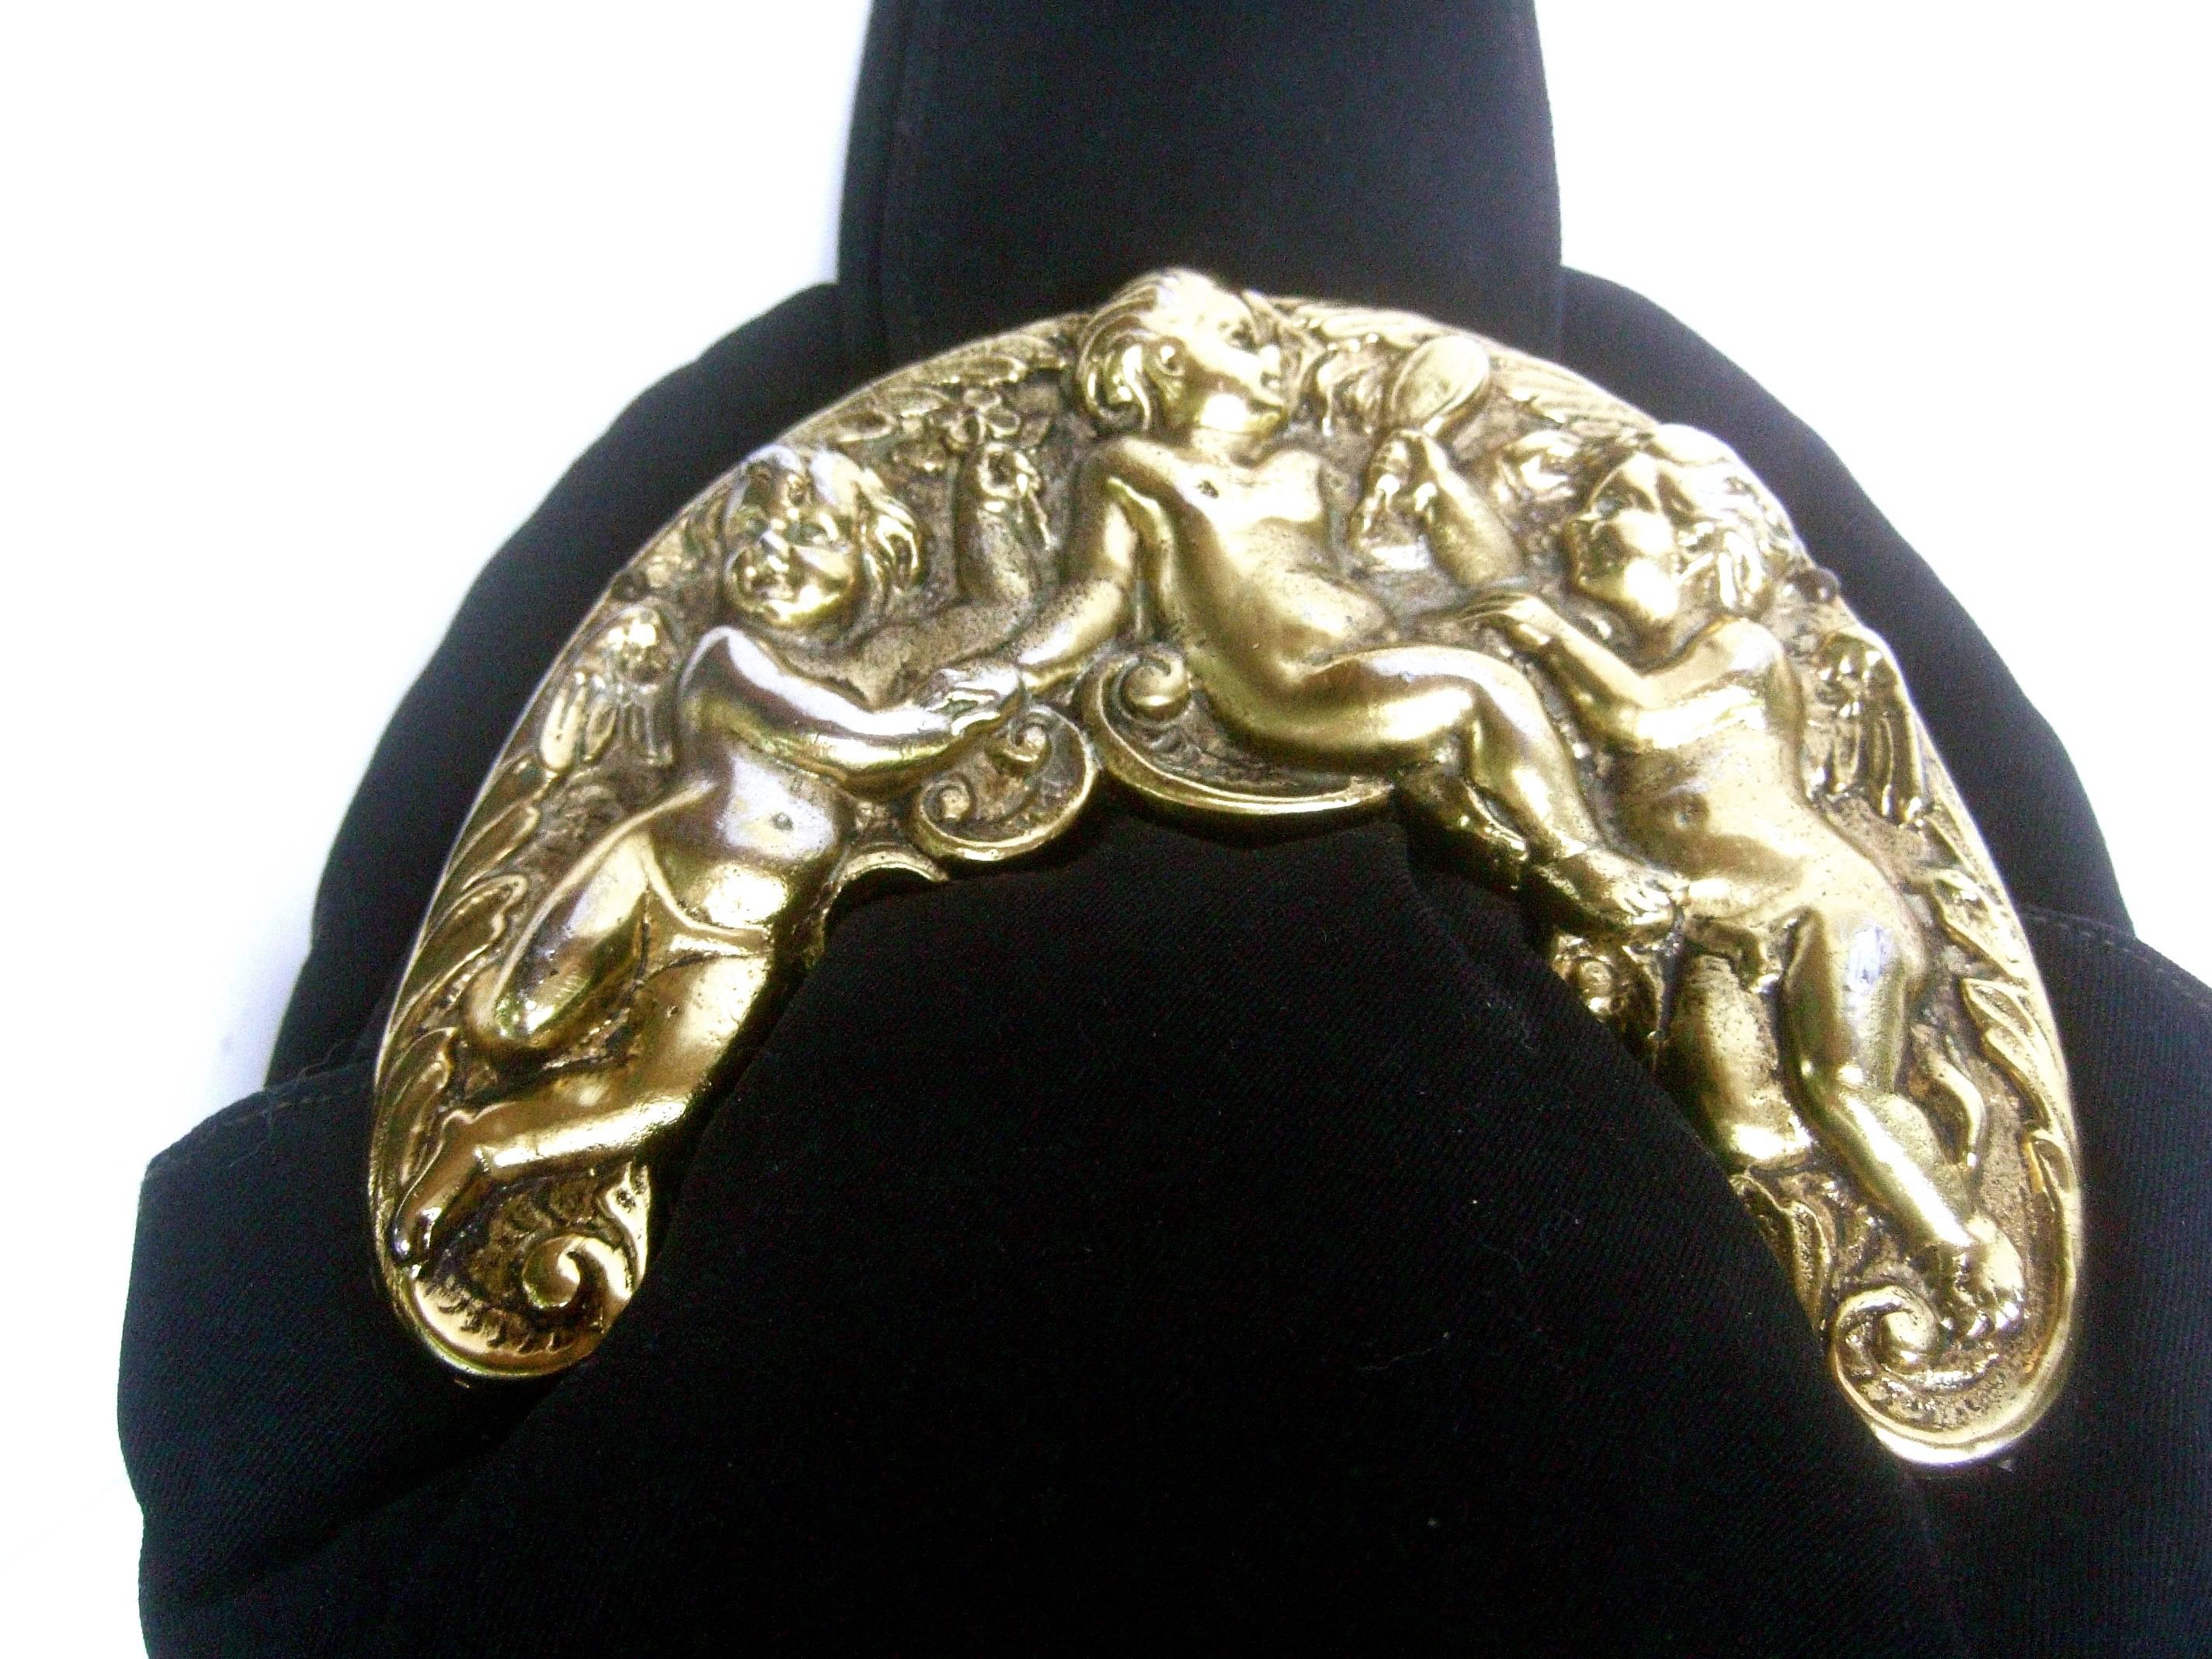 Ornate brass metal cherub emblem black cloth evening bag c 1950s 
The elegant midcentury evening bag is adorned with a
brass repousse plaque with a pair of winged cherubs 
and a young nude woman gazing into a vanity mirror 

The black cloth handle